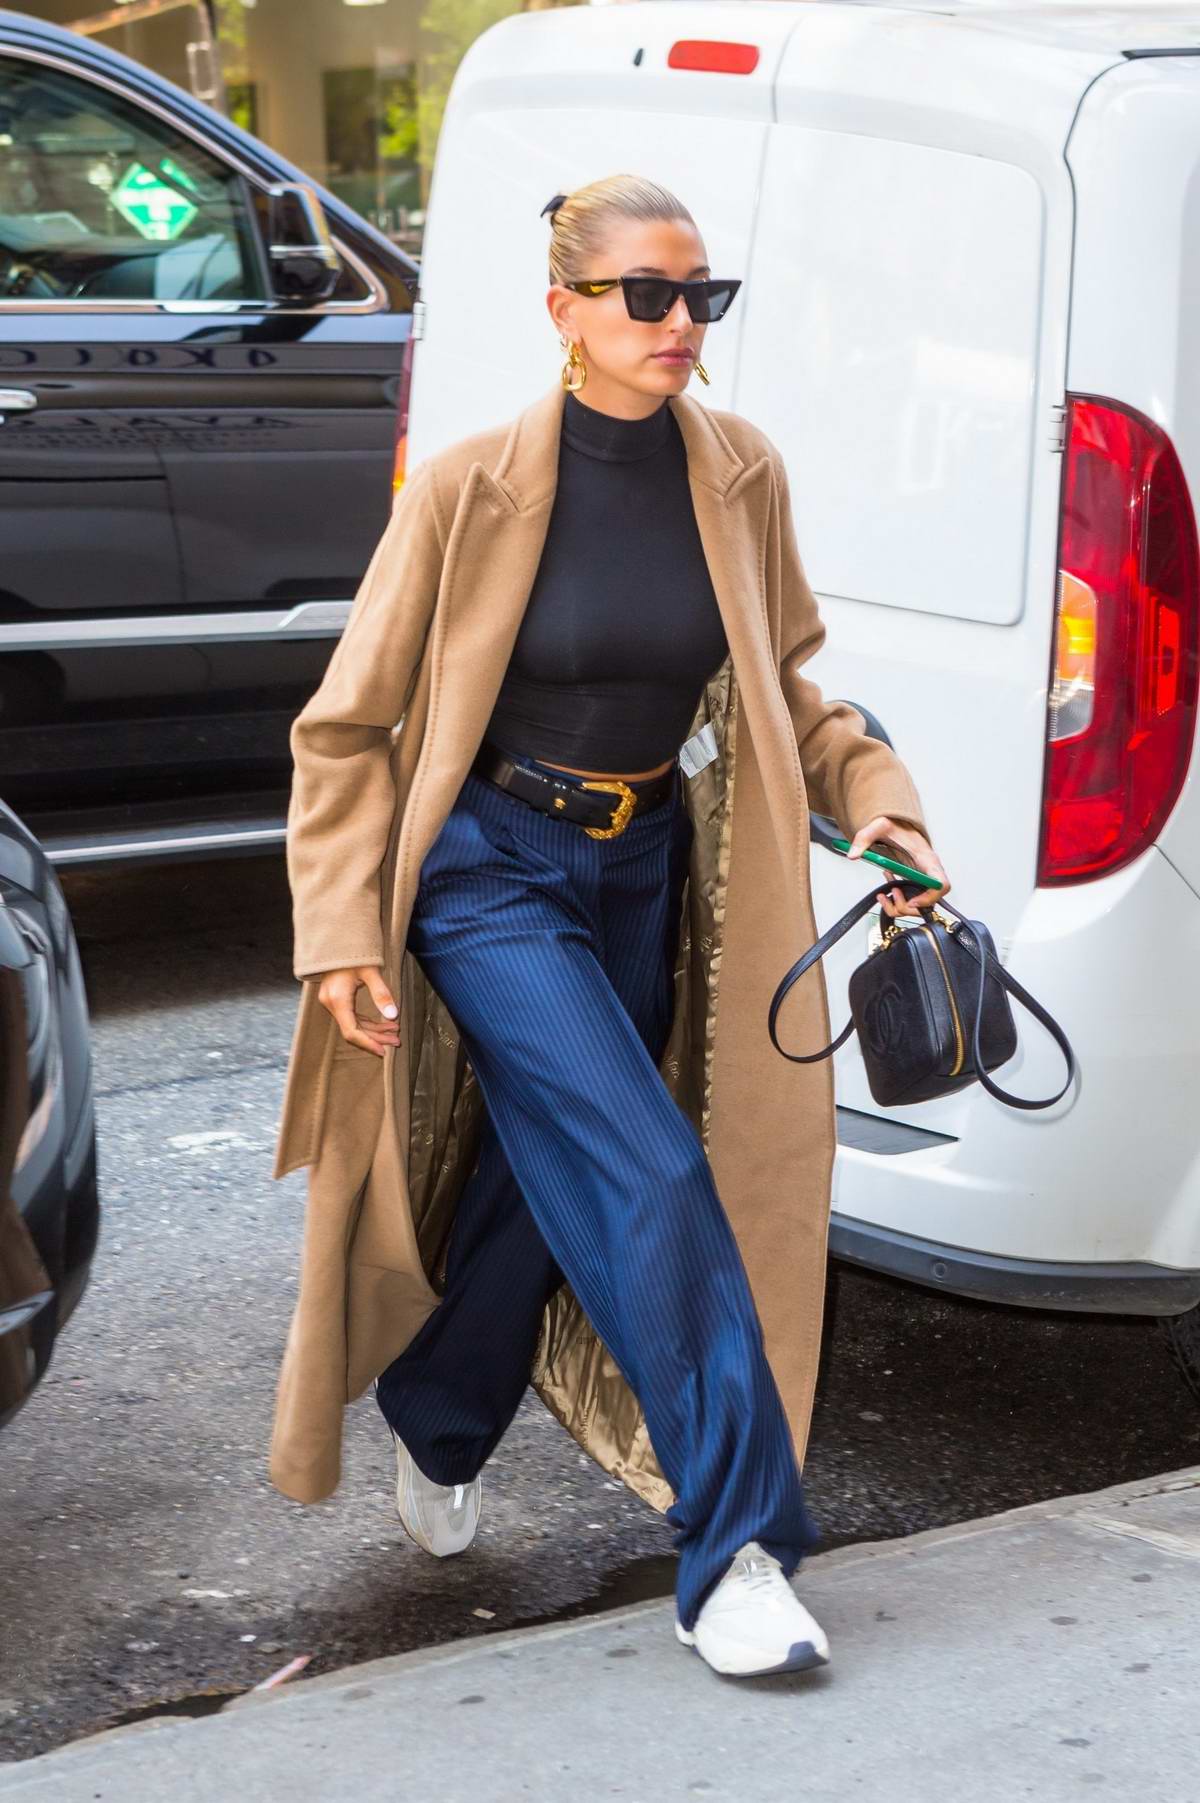 Hailey Baldwin's Camel Coat and Mom Jeans Look for Less - The